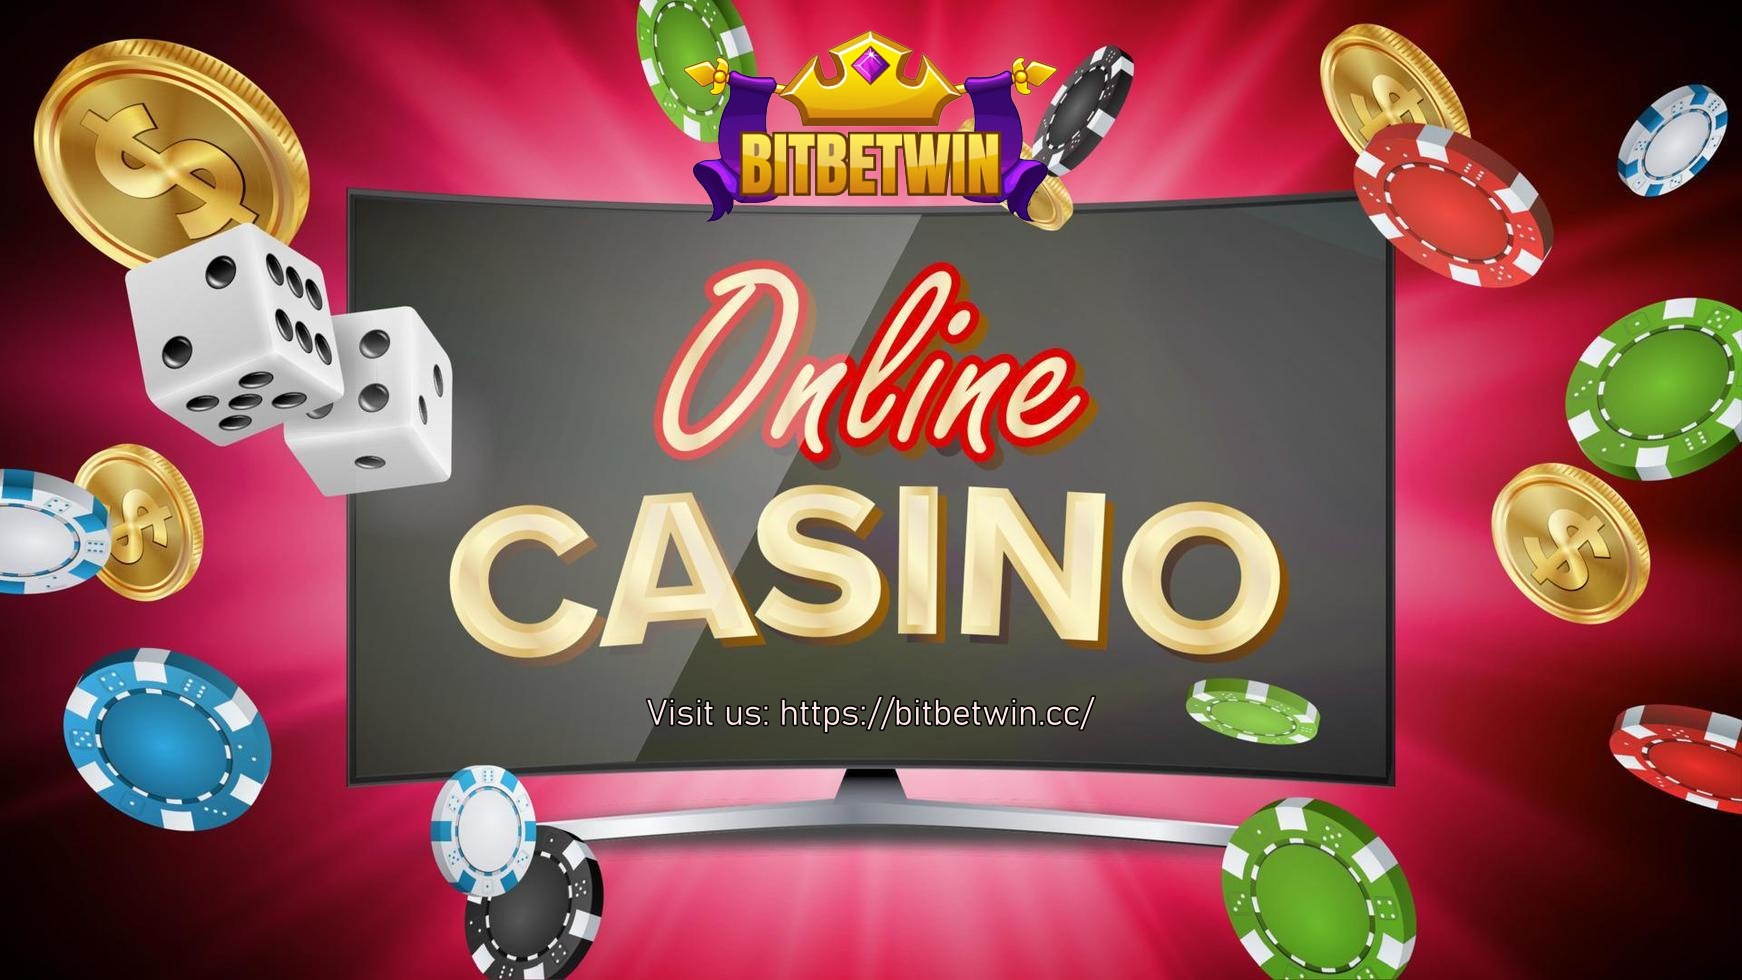 Take Your Casino Experience to the Next Level with Riversweeps Online Casino 777